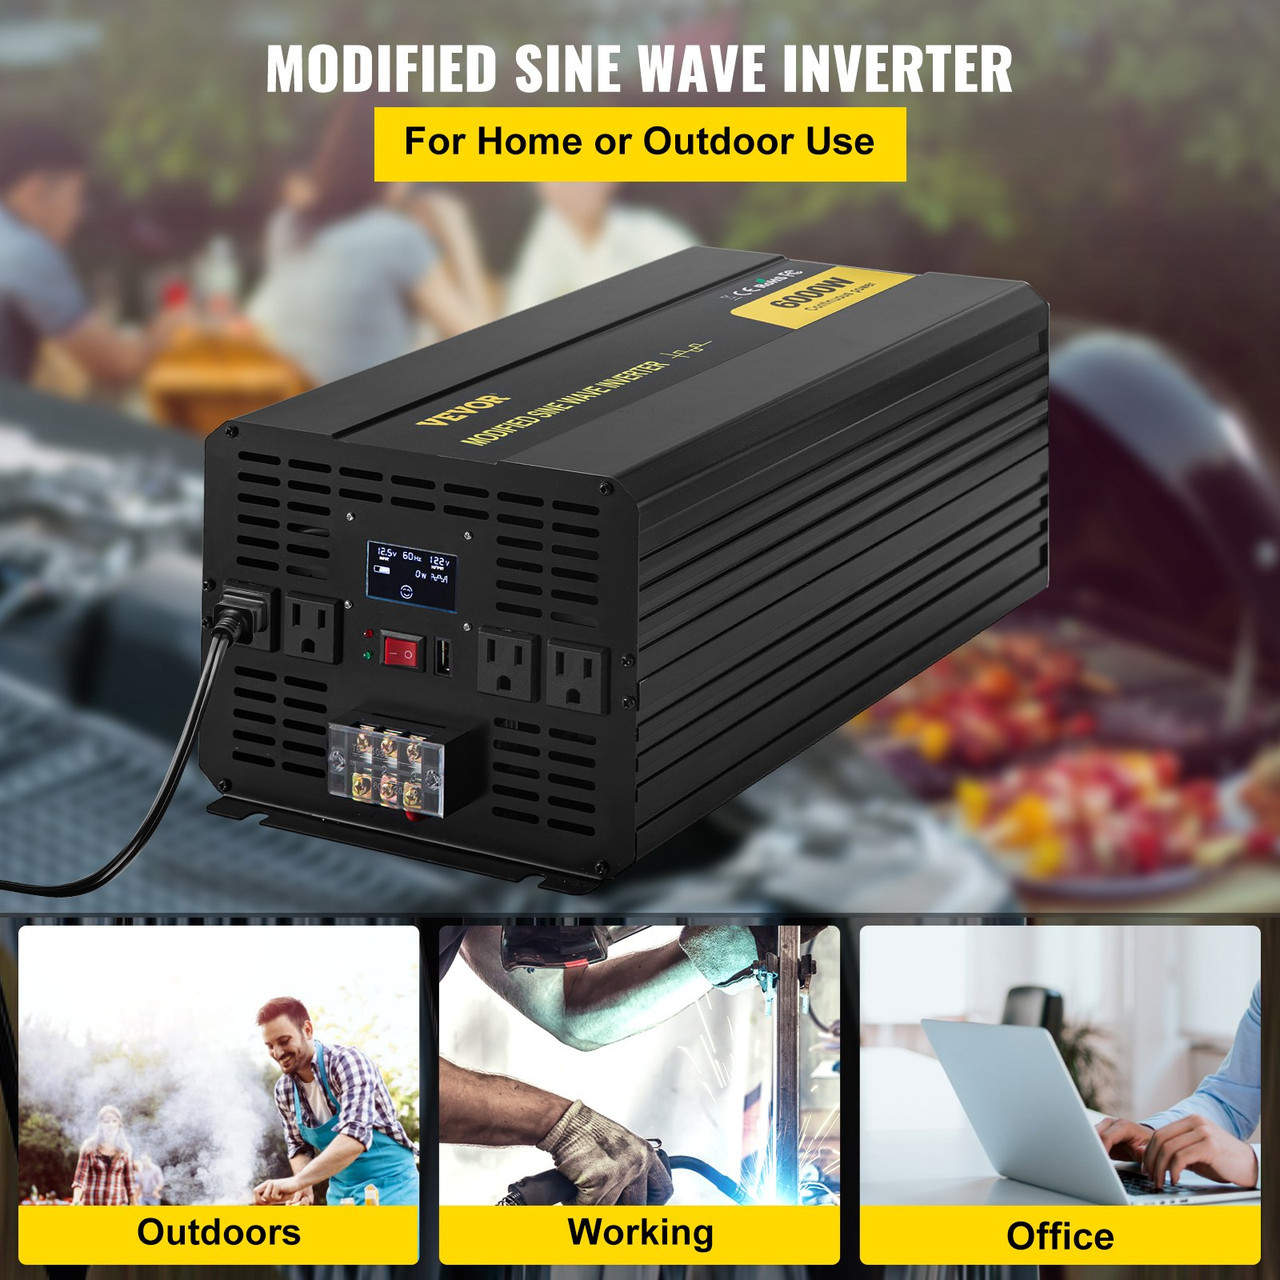 Power Inverter, 6000W Modified Sine Wave Inverter, DC 12V to AC 120V Car Converter, with LCD Display, Remote Controller, LED Indicator, AC Outlets Inverter for Truck RV Car Boat Travel Camping